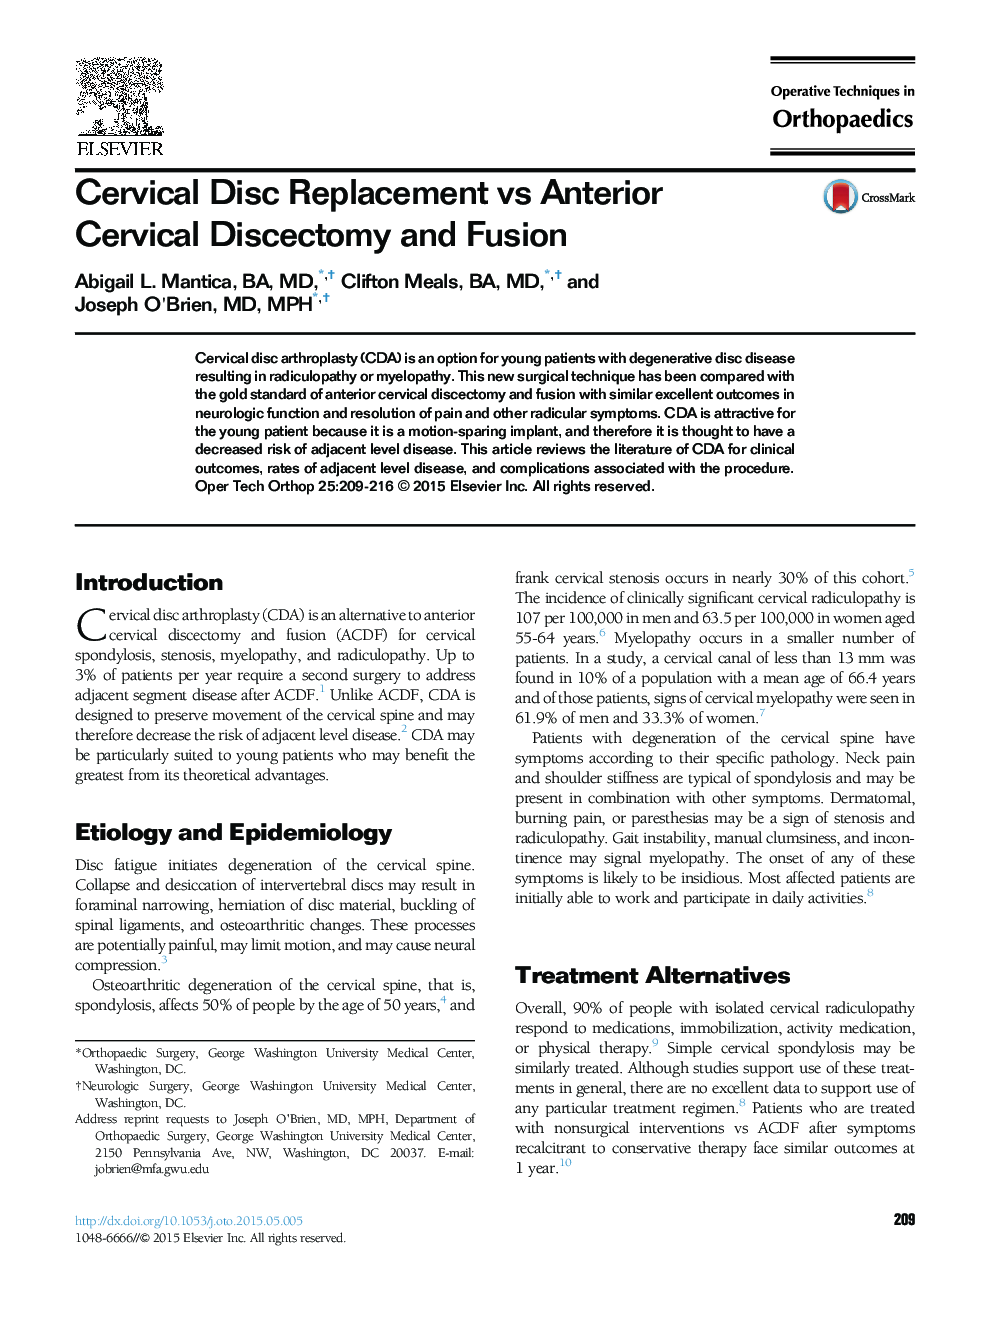 Cervical Disc Replacement vs Anterior Cervical Discectomy and Fusion